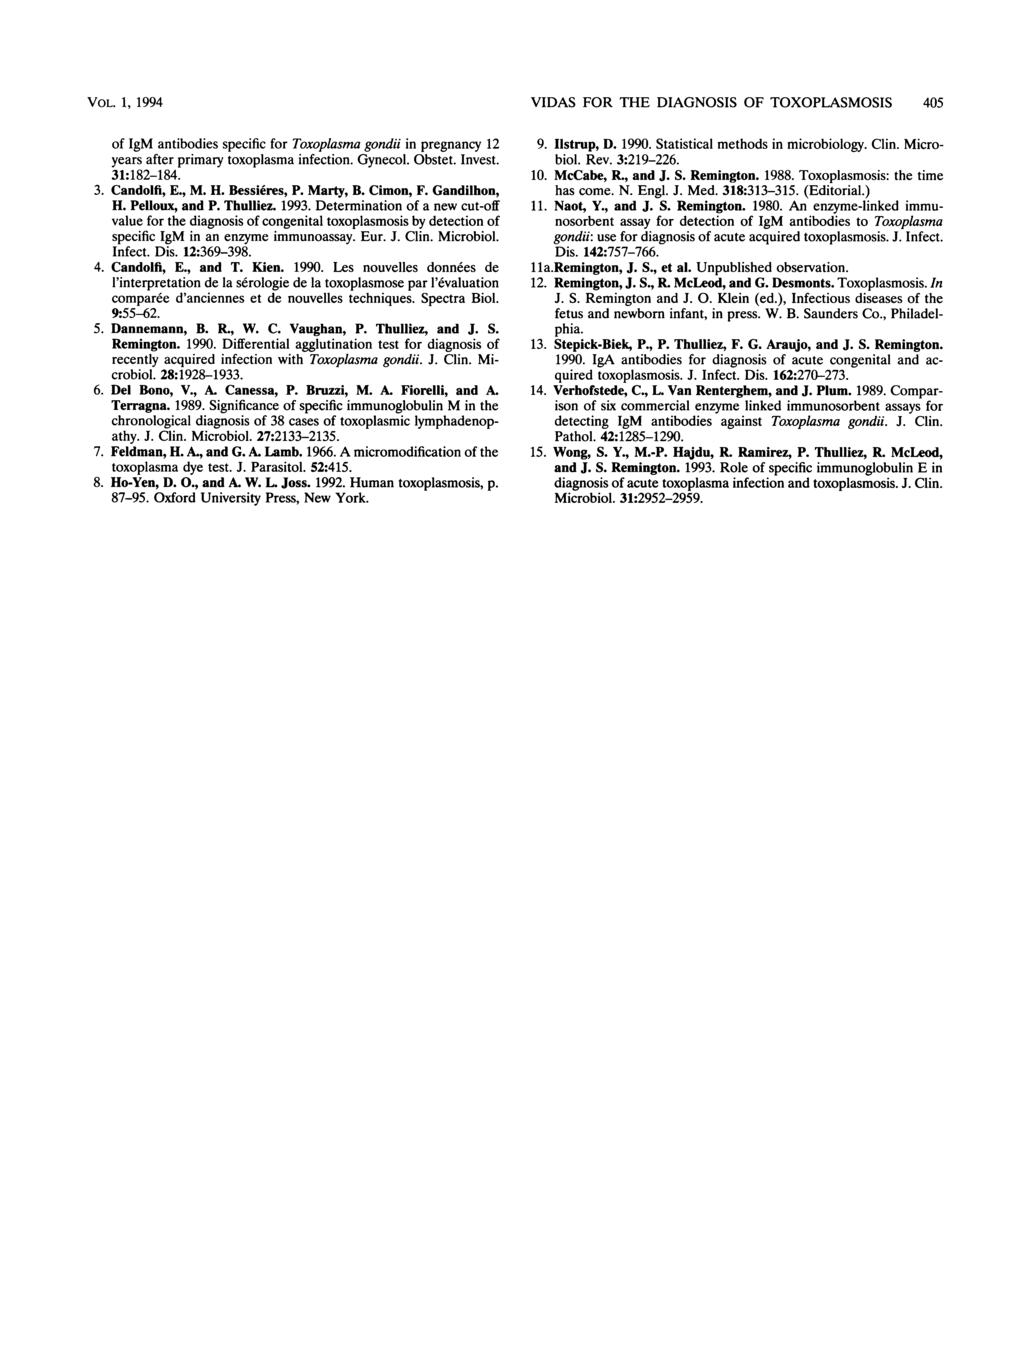 VOL. 1, 1994 of IgM antibodies specific for Toxoplasma gondii in pregnancy 12 years after primary toxoplasma infection. Gynecol. Obstet. Invest. 31:182-184. 3. Candolfi, E., M. H. Bessieres, P.